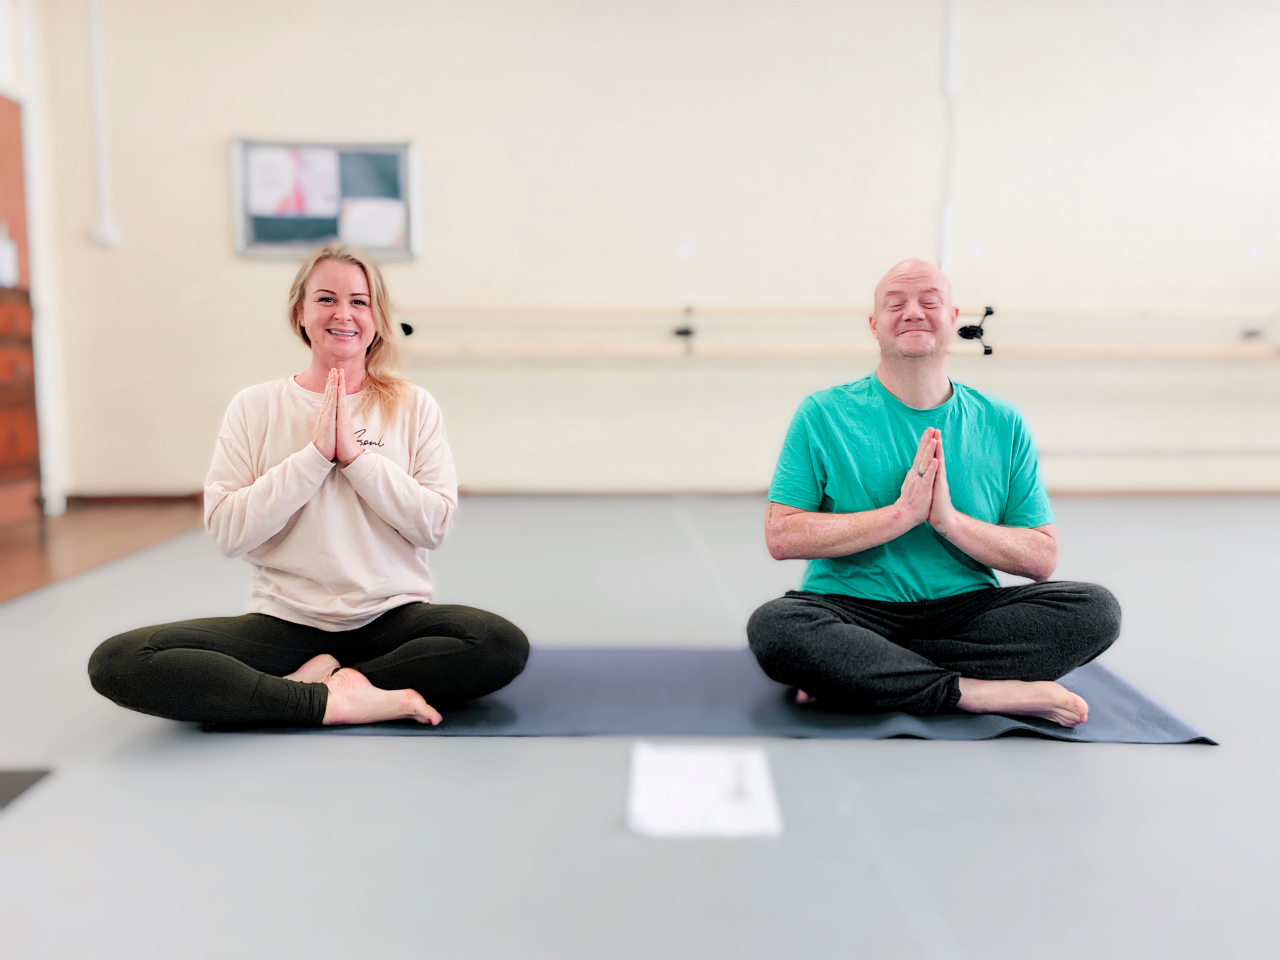 Man and women on a yoga mat in sitting yoga pose